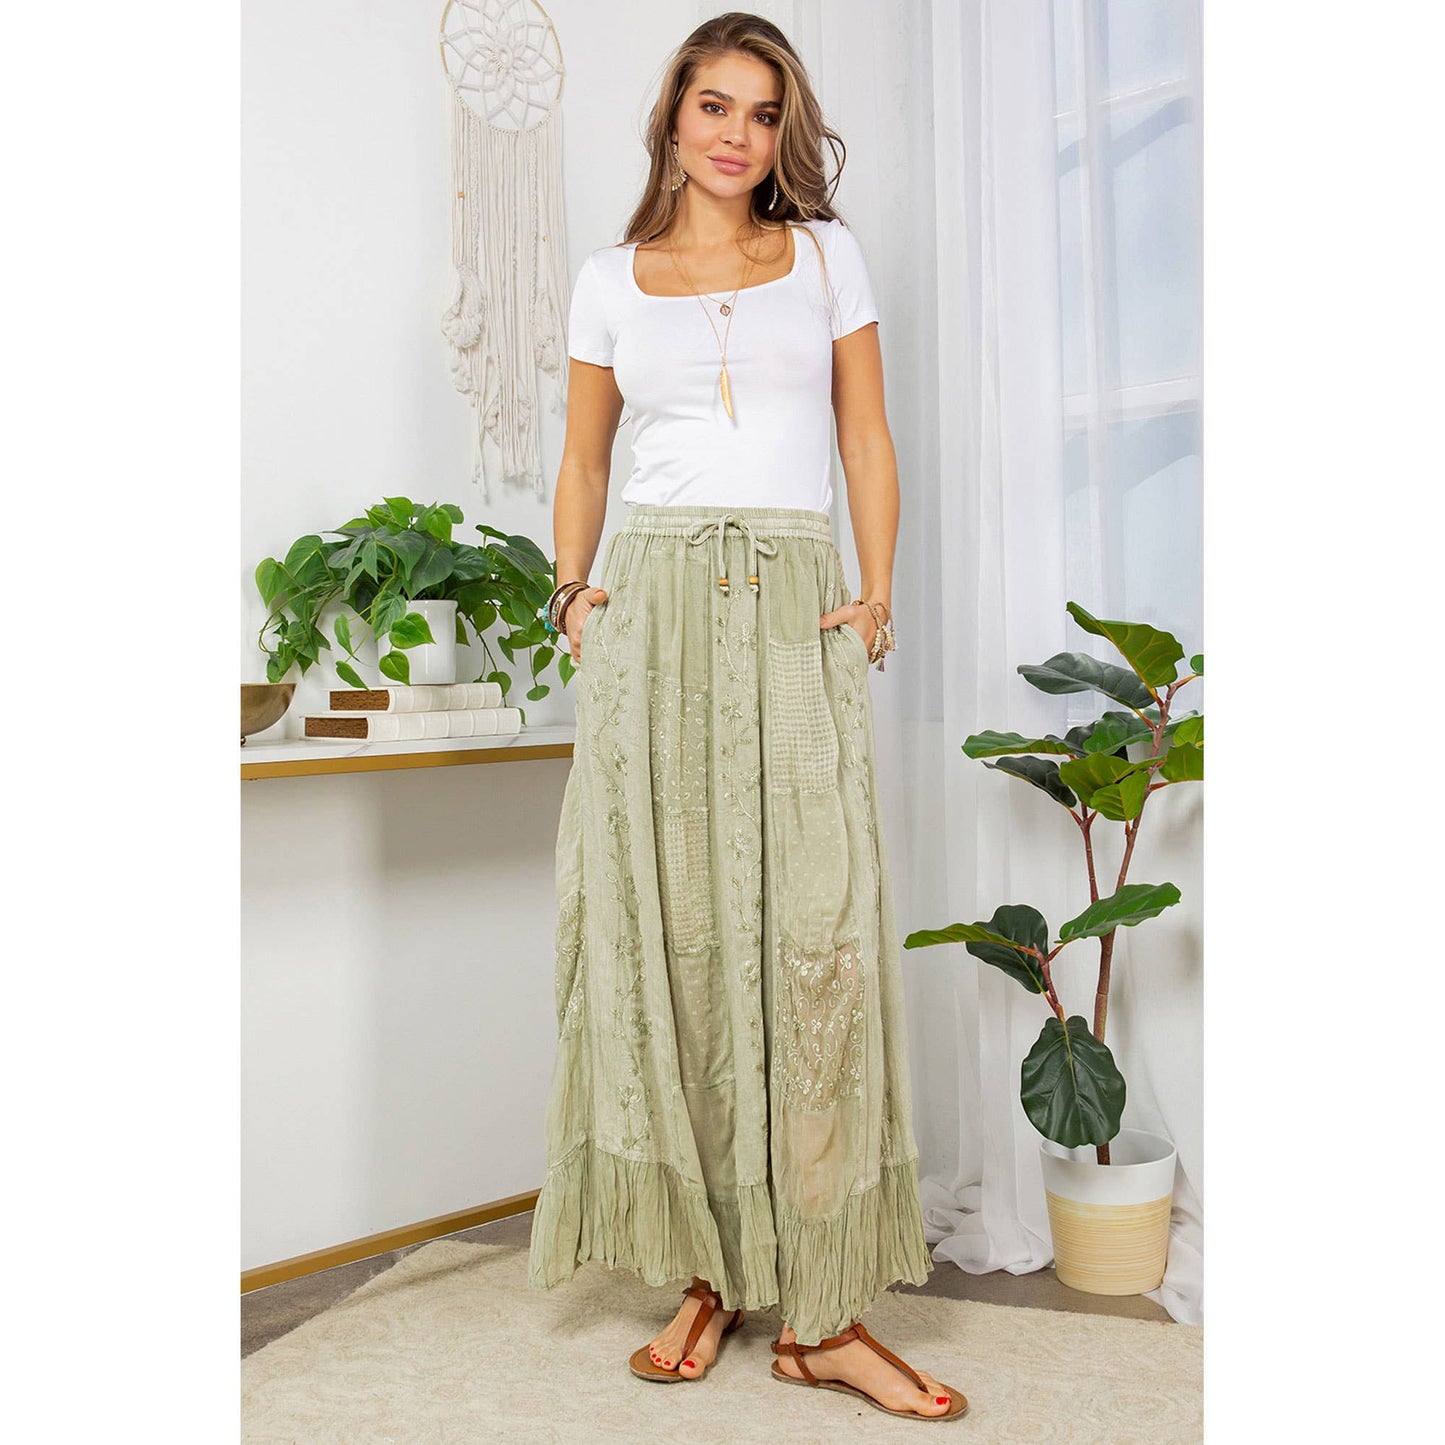 Young Threads - Gypsy Rhapsody: Textured Tiered Skirt With Aari Embroidery: Olive